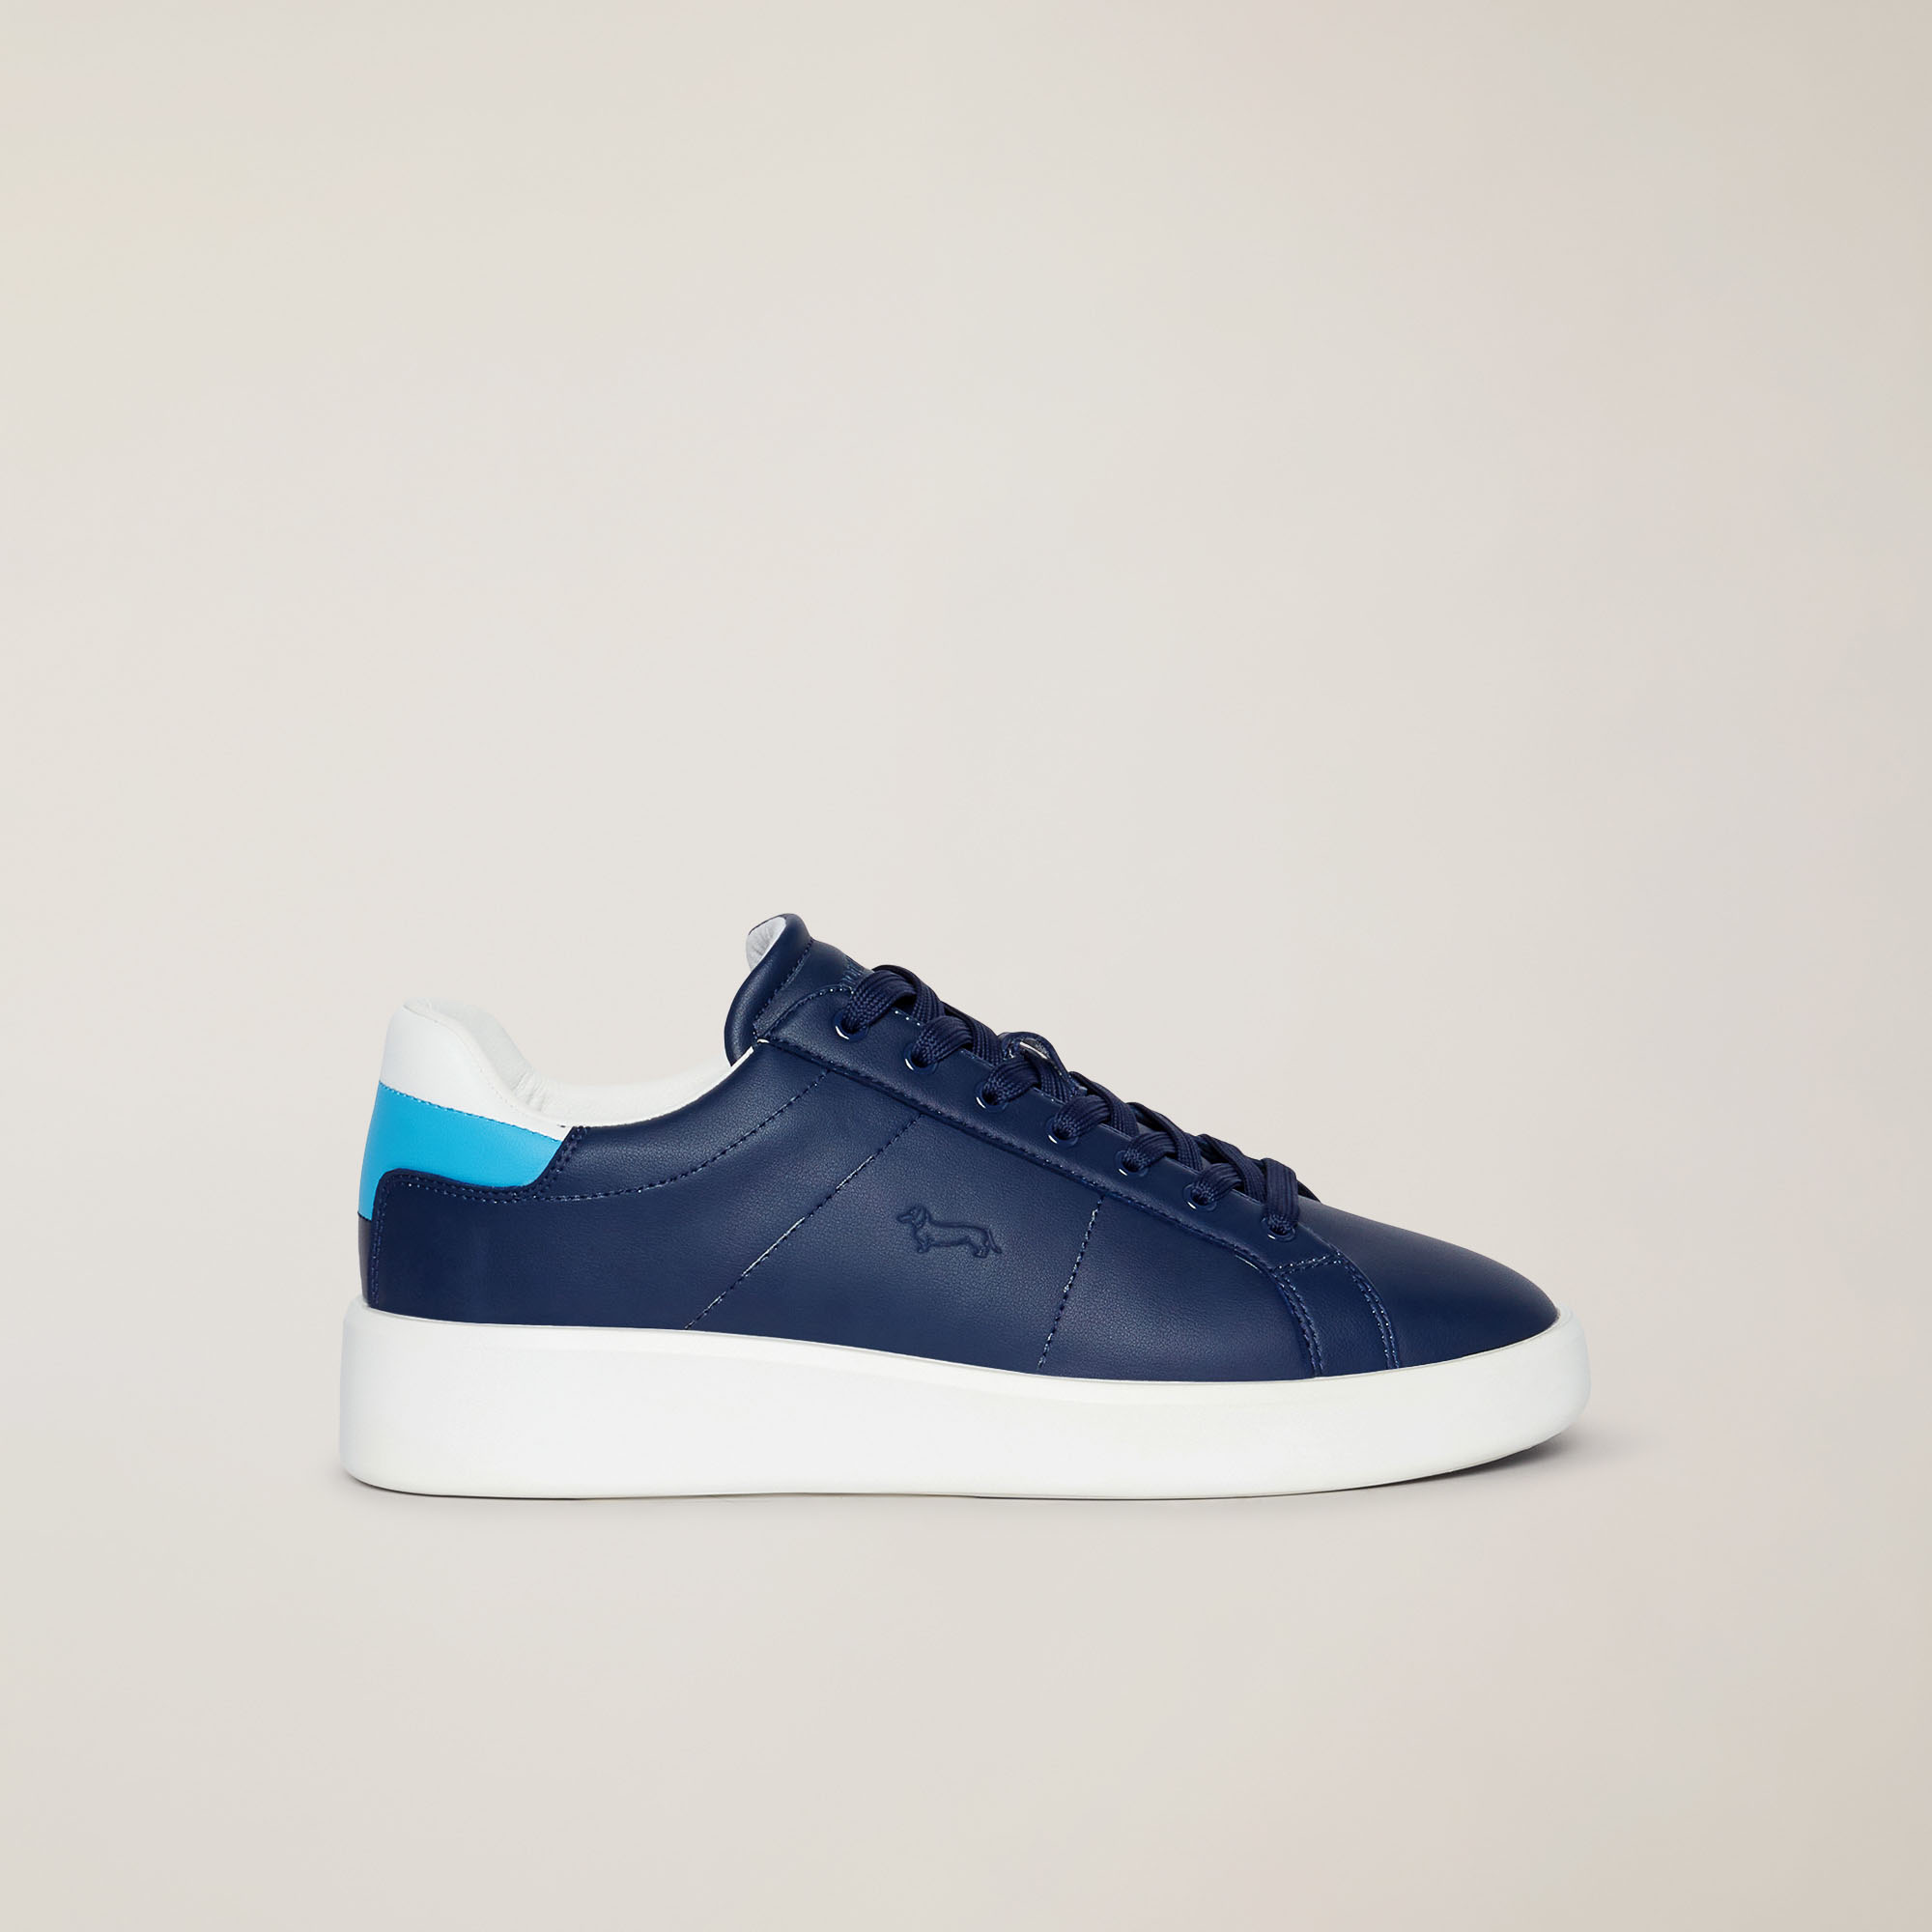 Sneaker with Oversize Sole, Blue, large